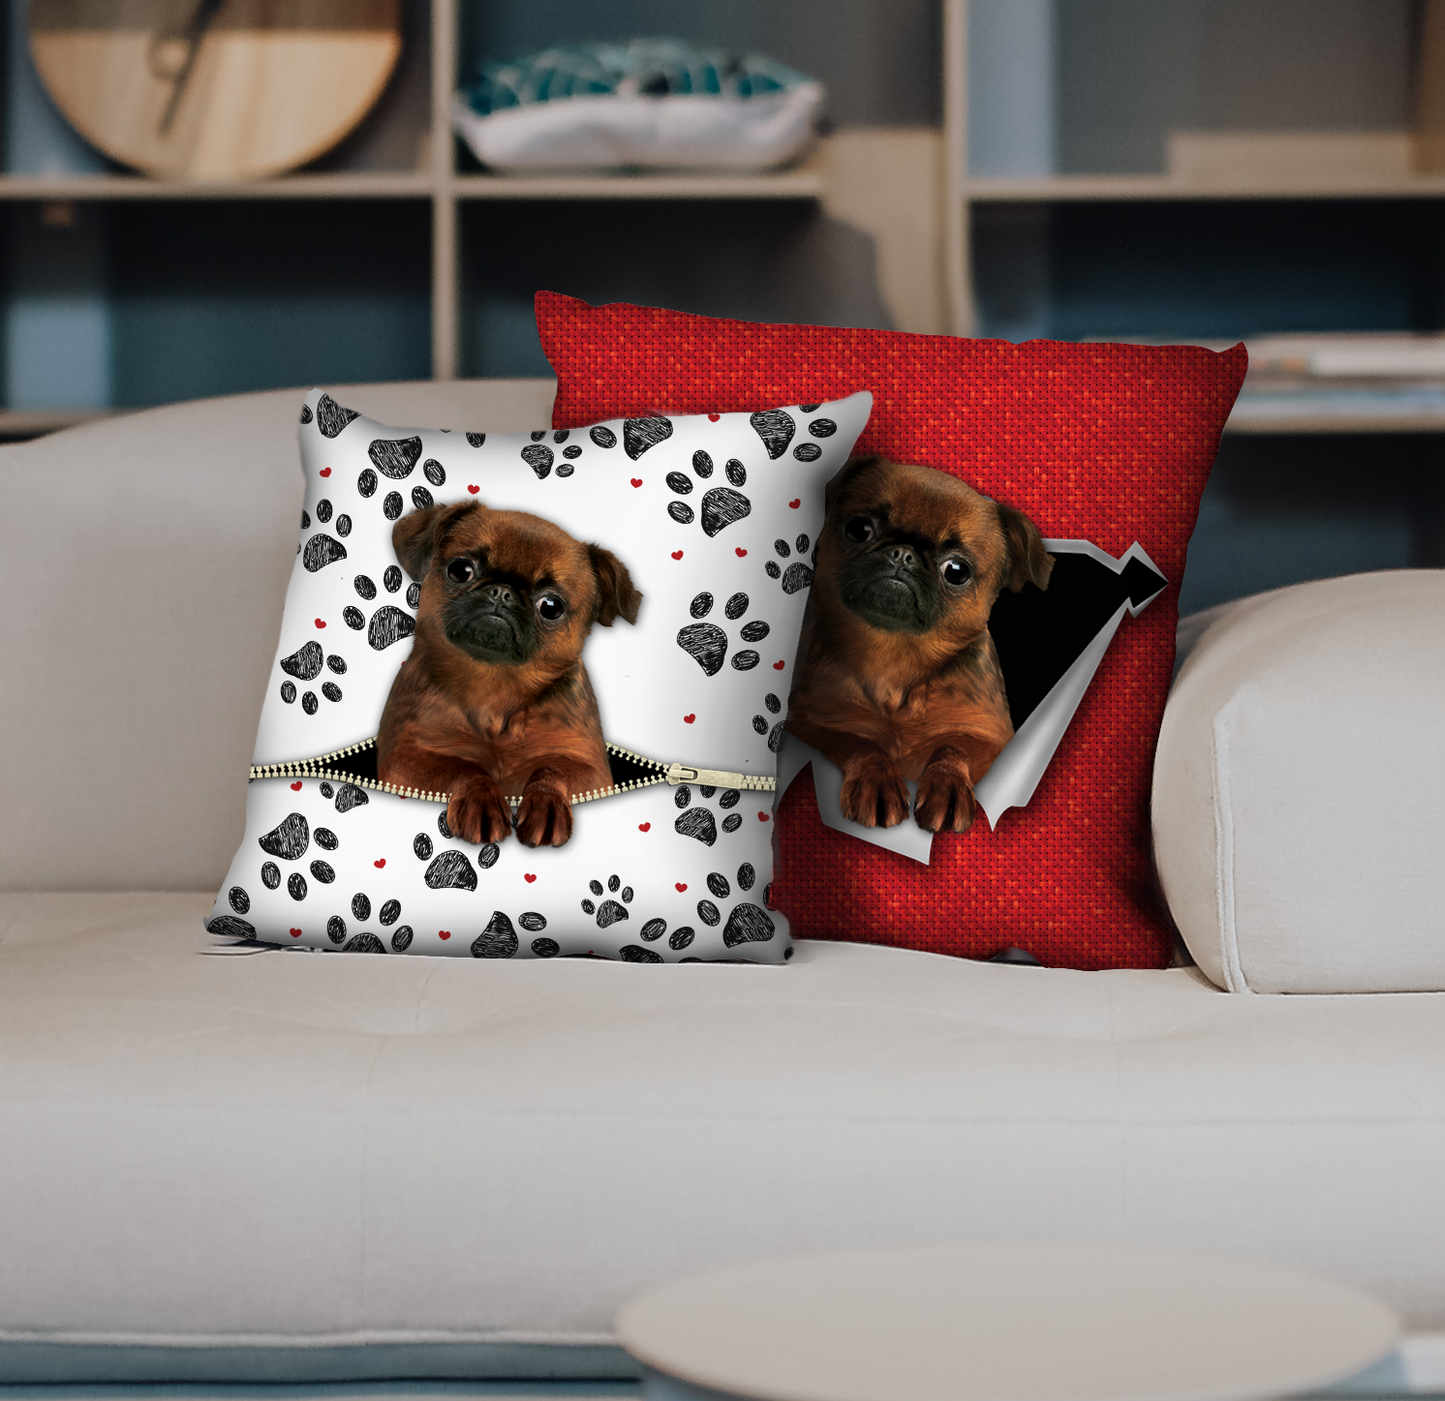 They Steal Your Couch - Griffon Bruxellois Pillow Cases V2 (Set of 2)